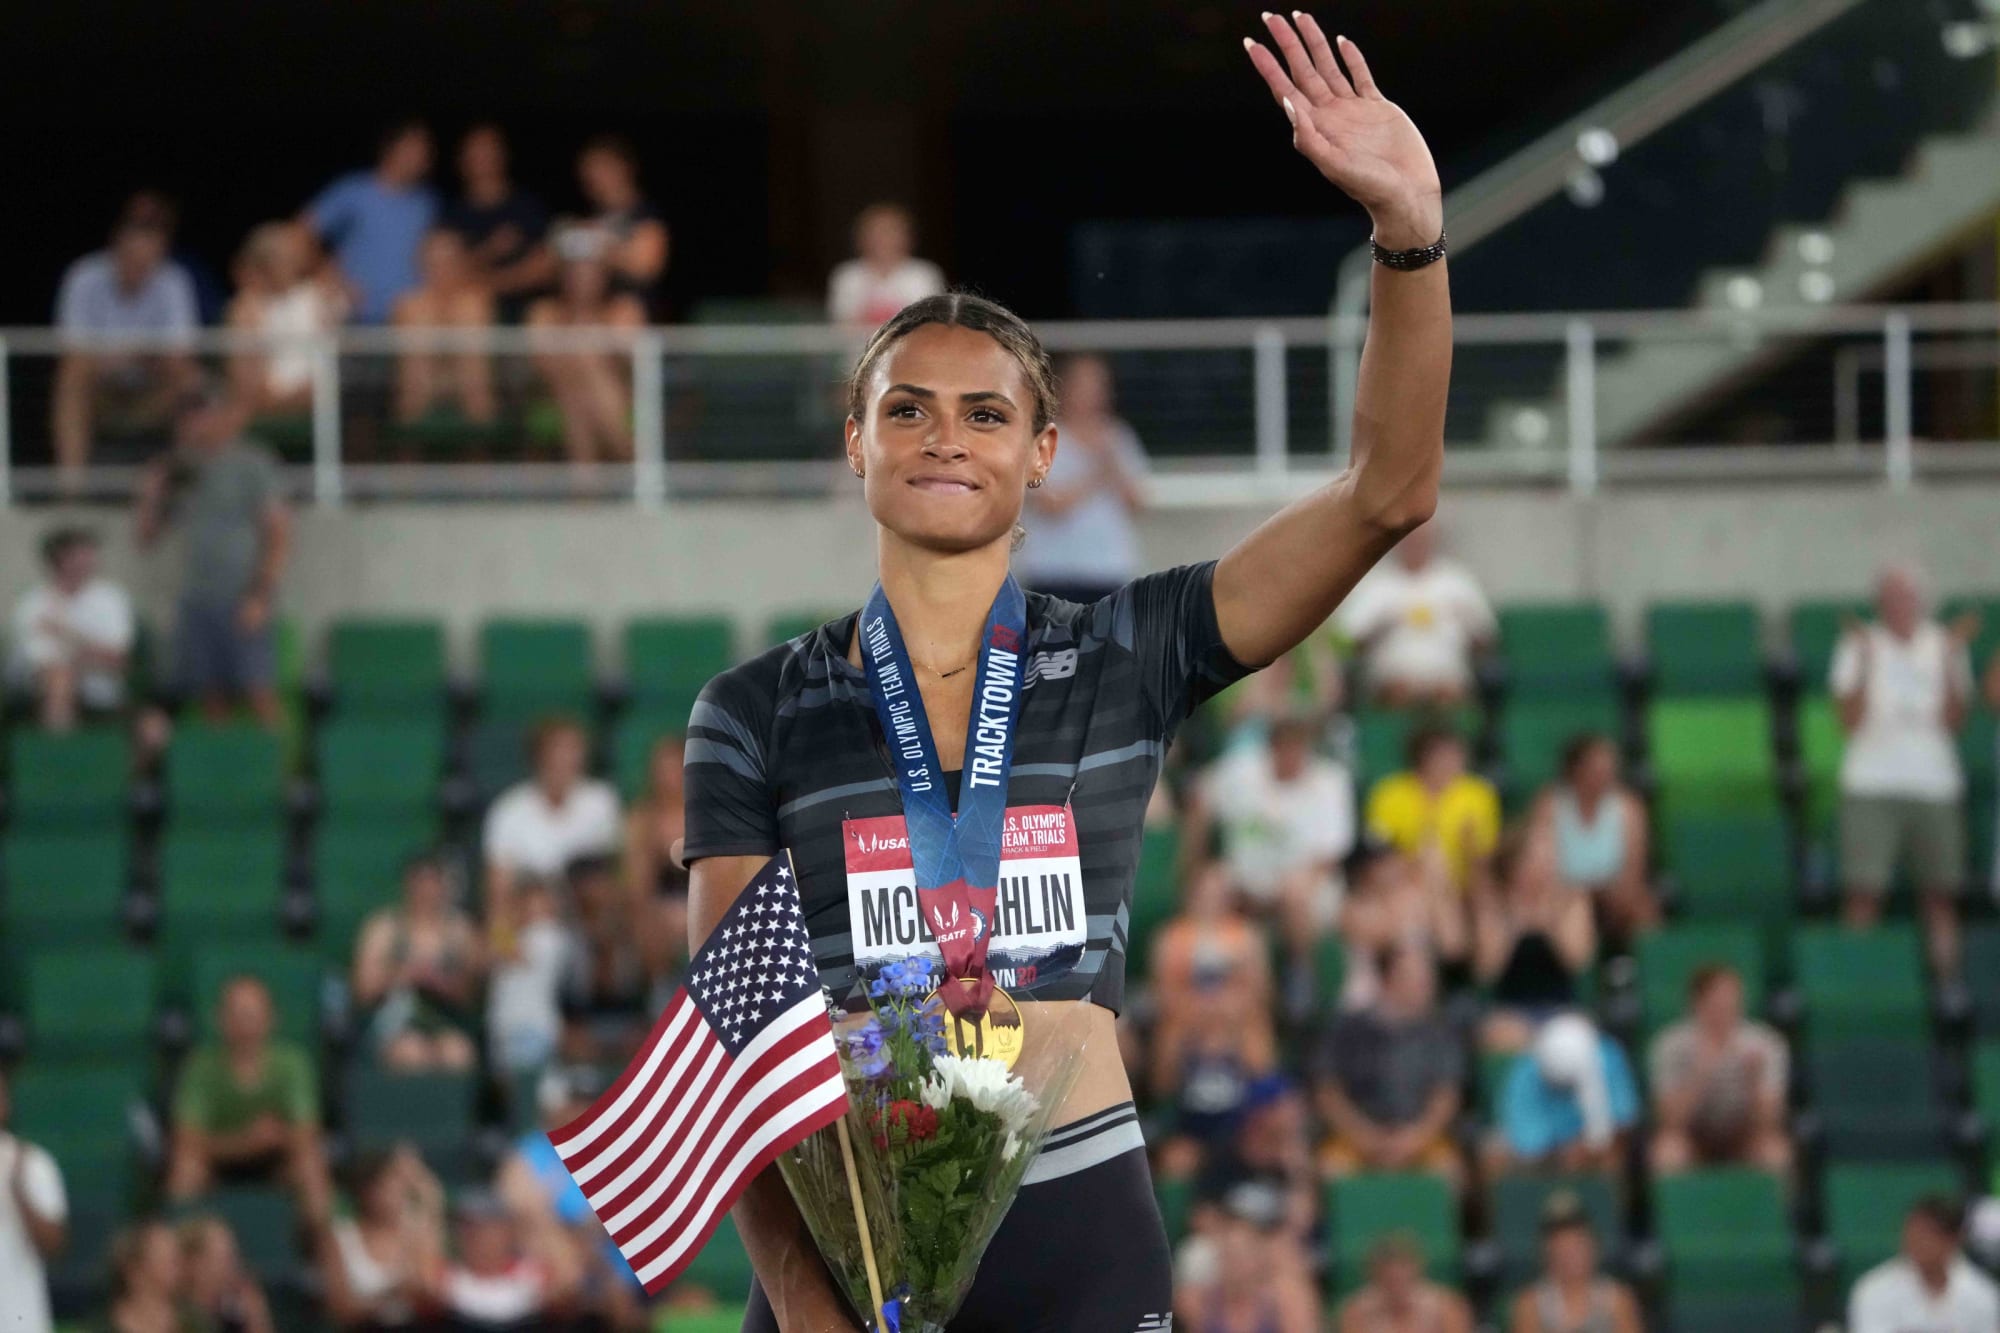 Who Is Sydney Mclaughlin Meet The Record Breaking Hurdler Headed To 2021 Olympics